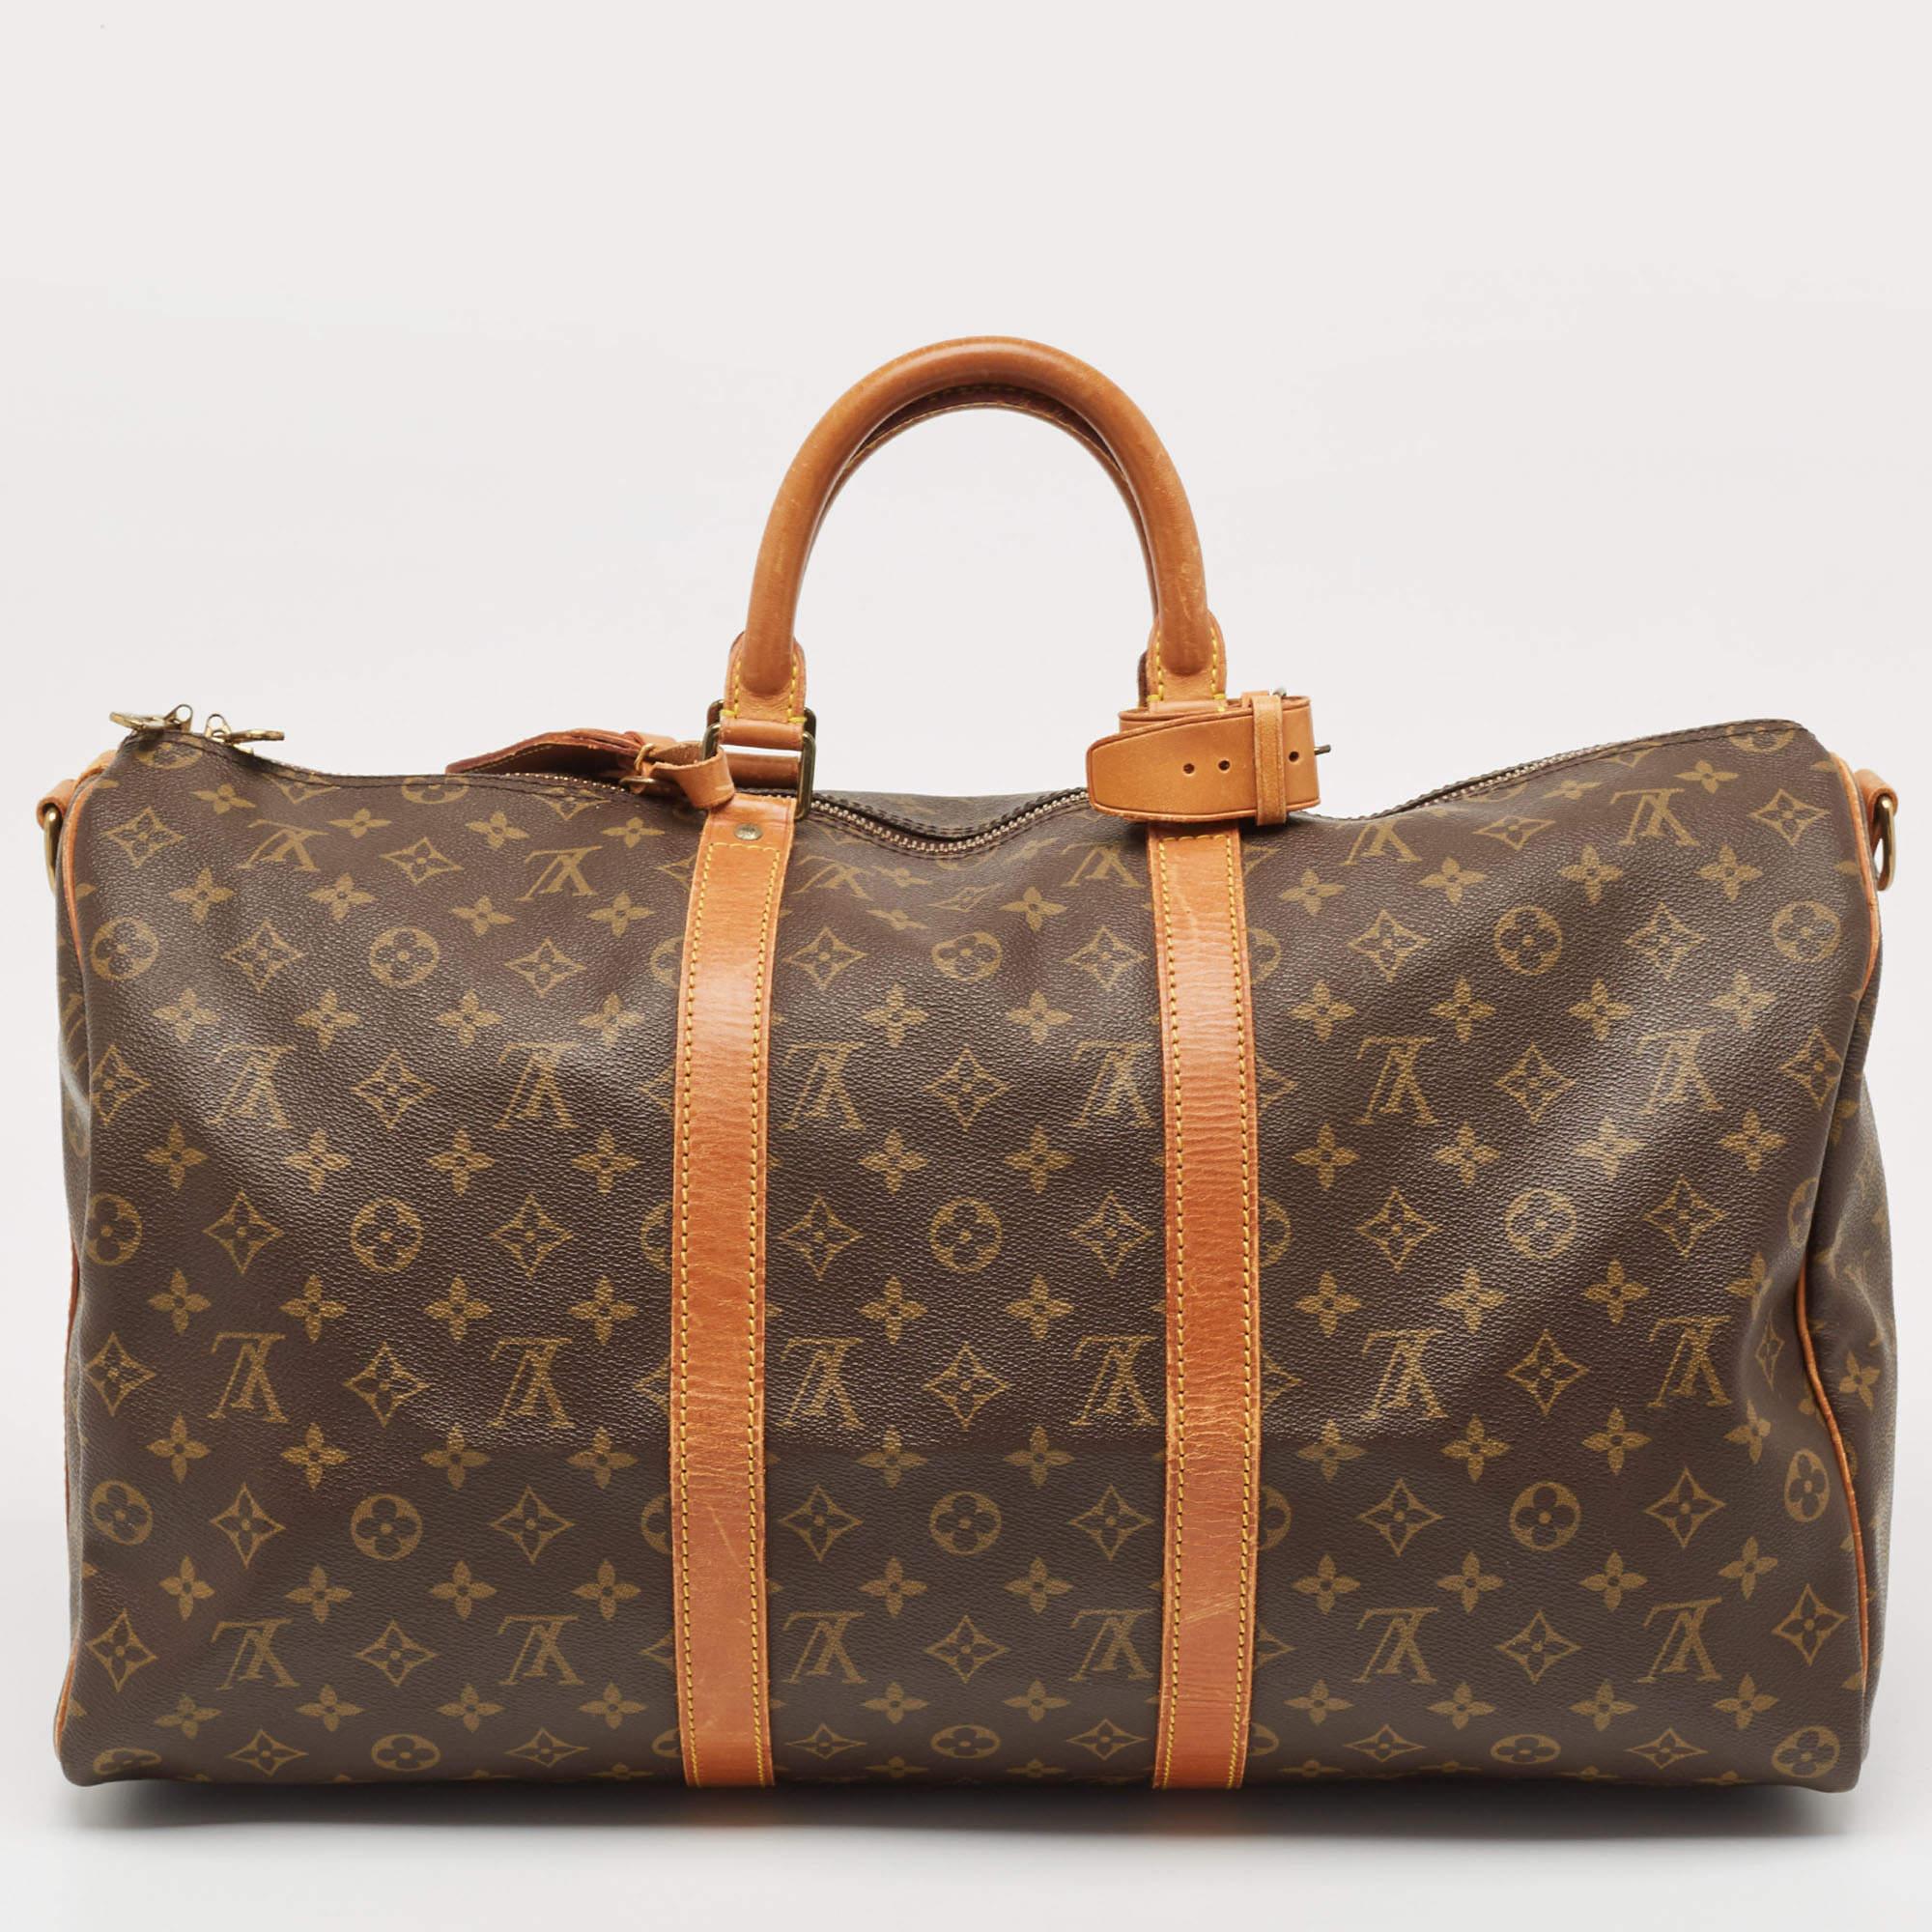 This Bandouliere 50 from the house of Louis Vuitton is an accessory you will turn to when you have travel plans. It has been crafted using the best kind of materials to be appealing as well as durable. It's a worthy investment.

Includes: Leather